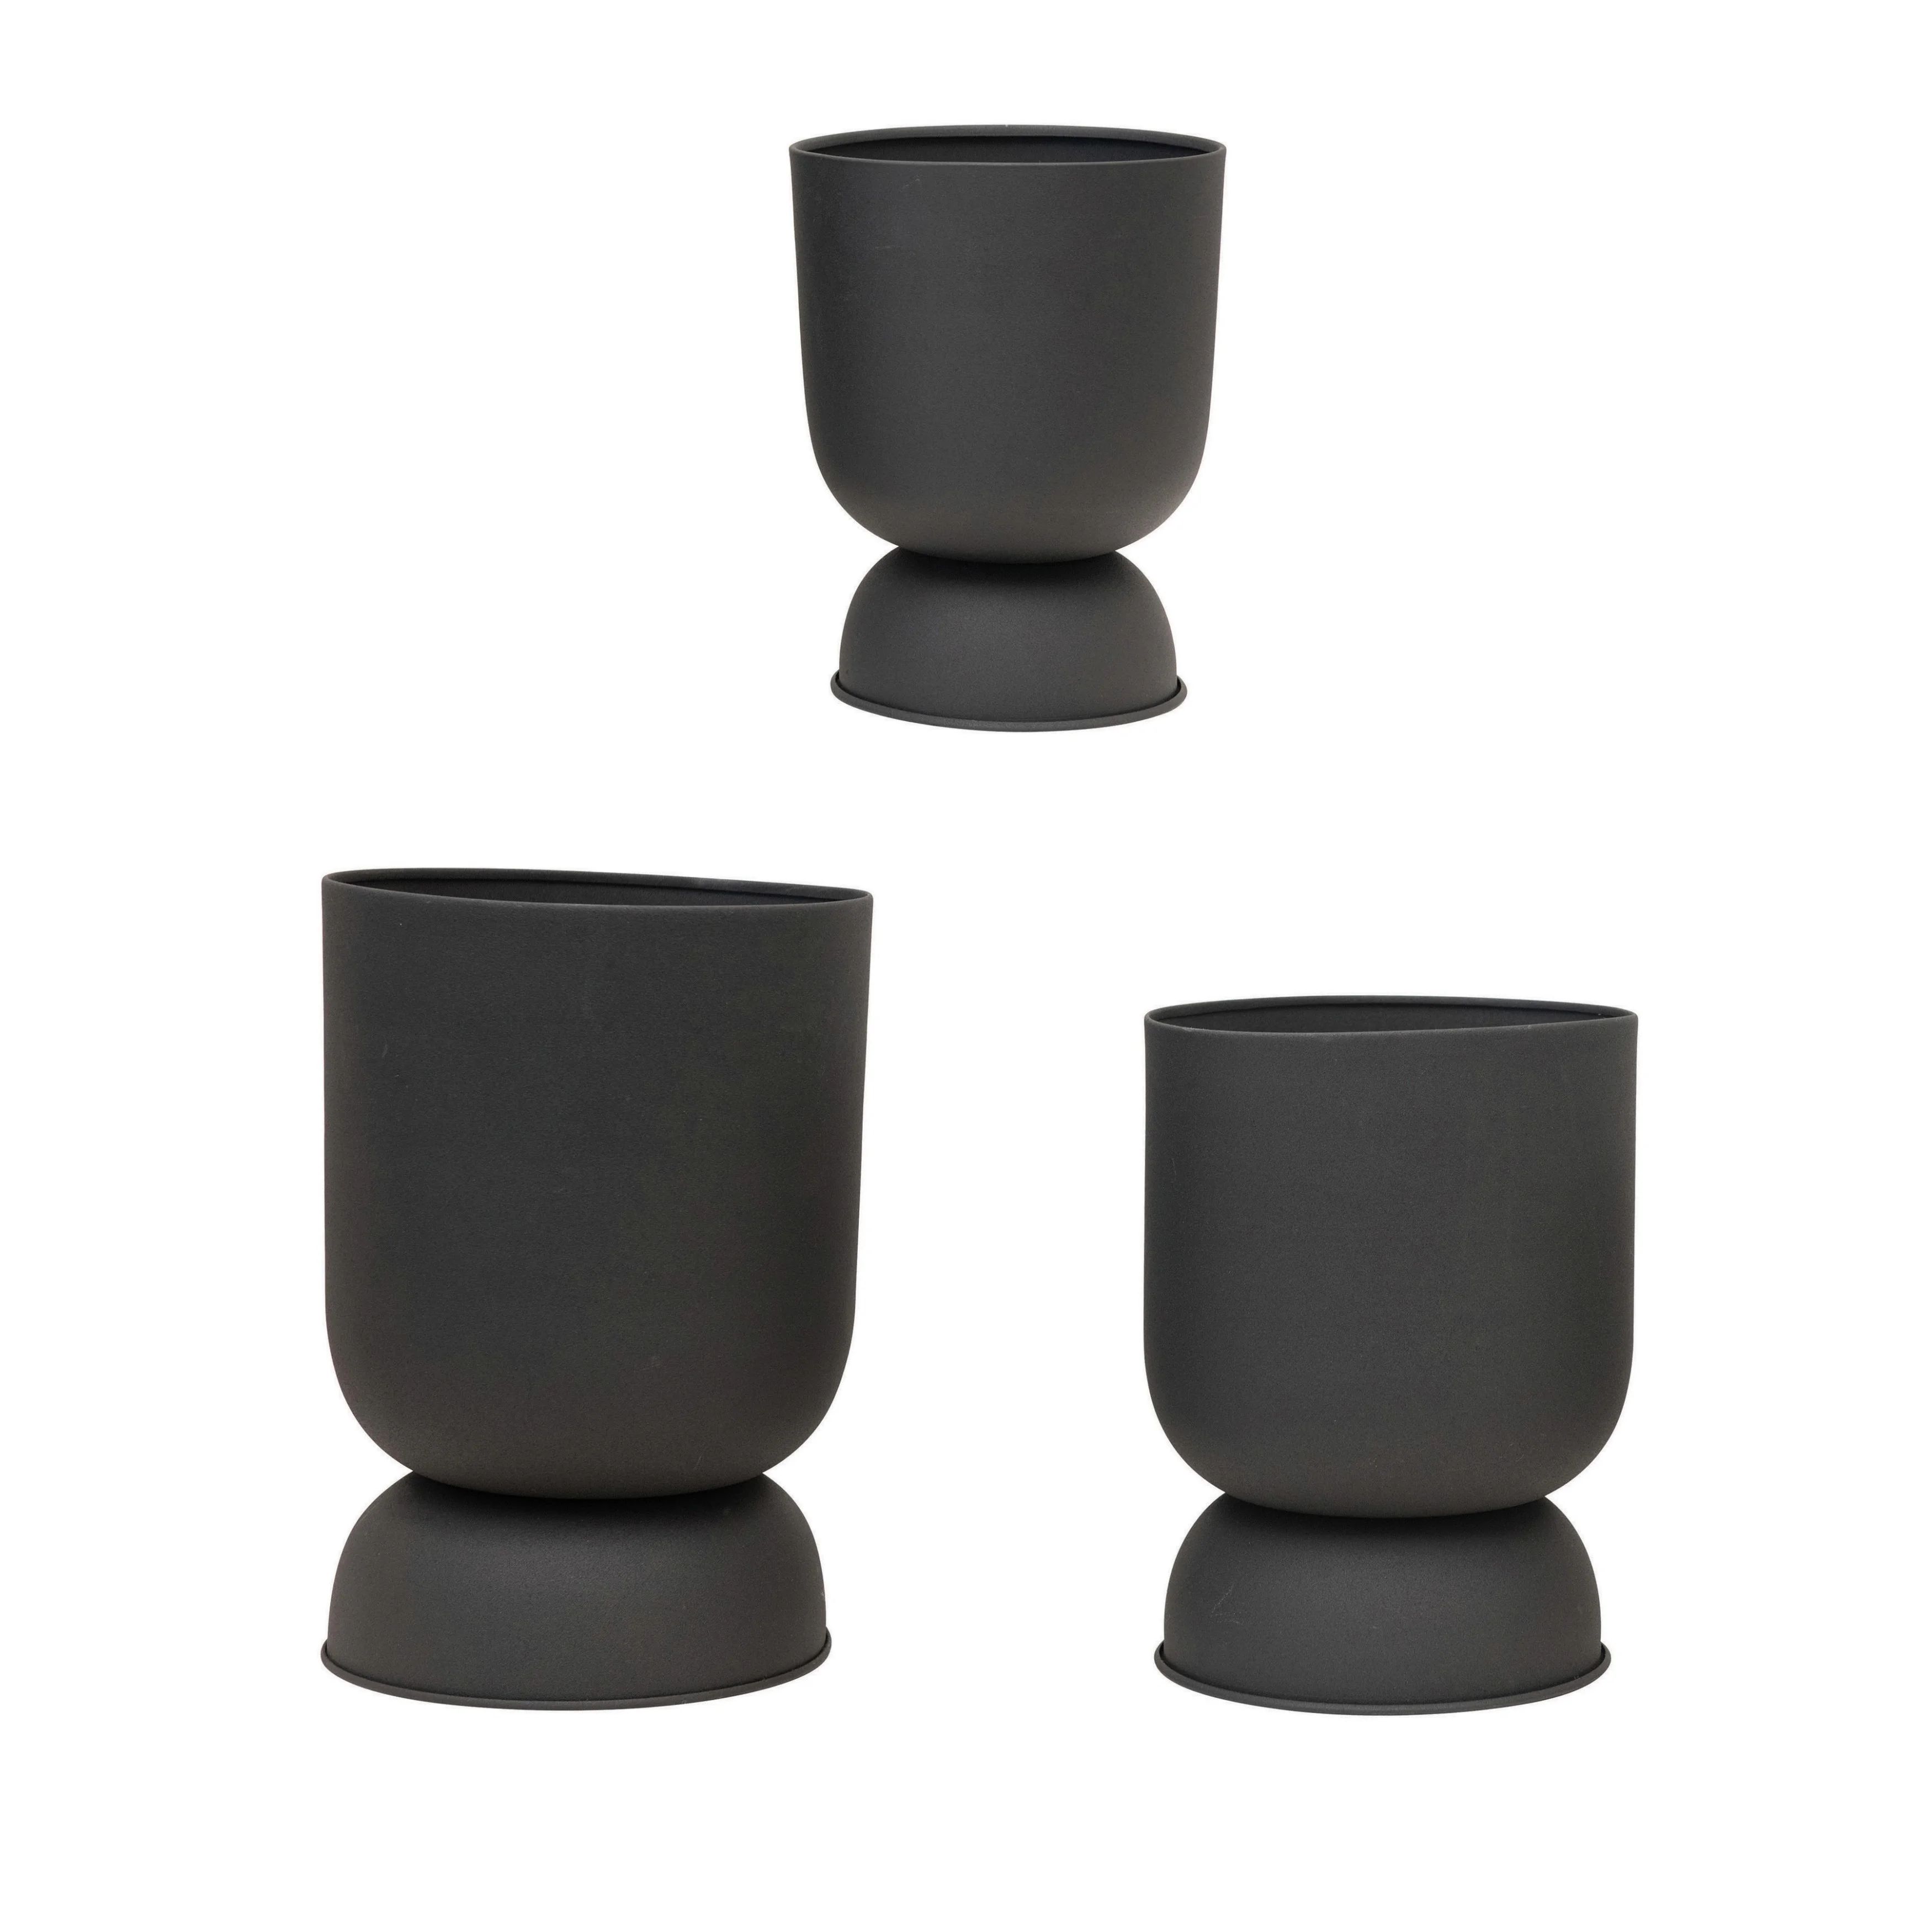 Bloomingville Textured Metal Footed Planters, Black Finish, Set of 3 (Holds 9", 8" & 7" Pots) | Walmart (US)